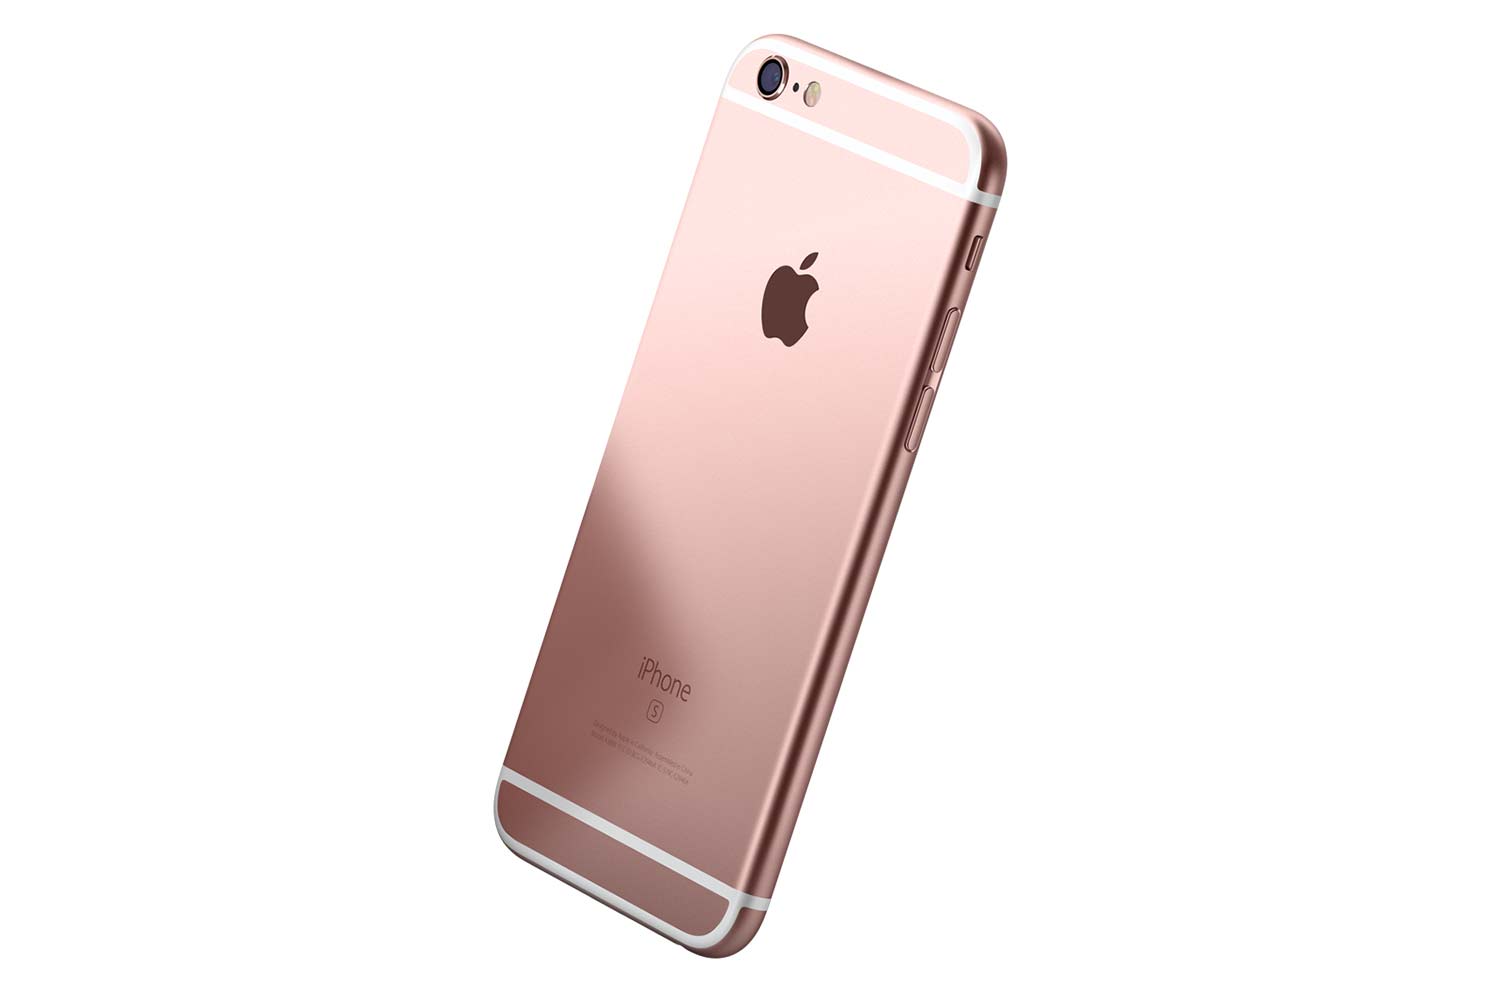 iphone 6s news cameras back large